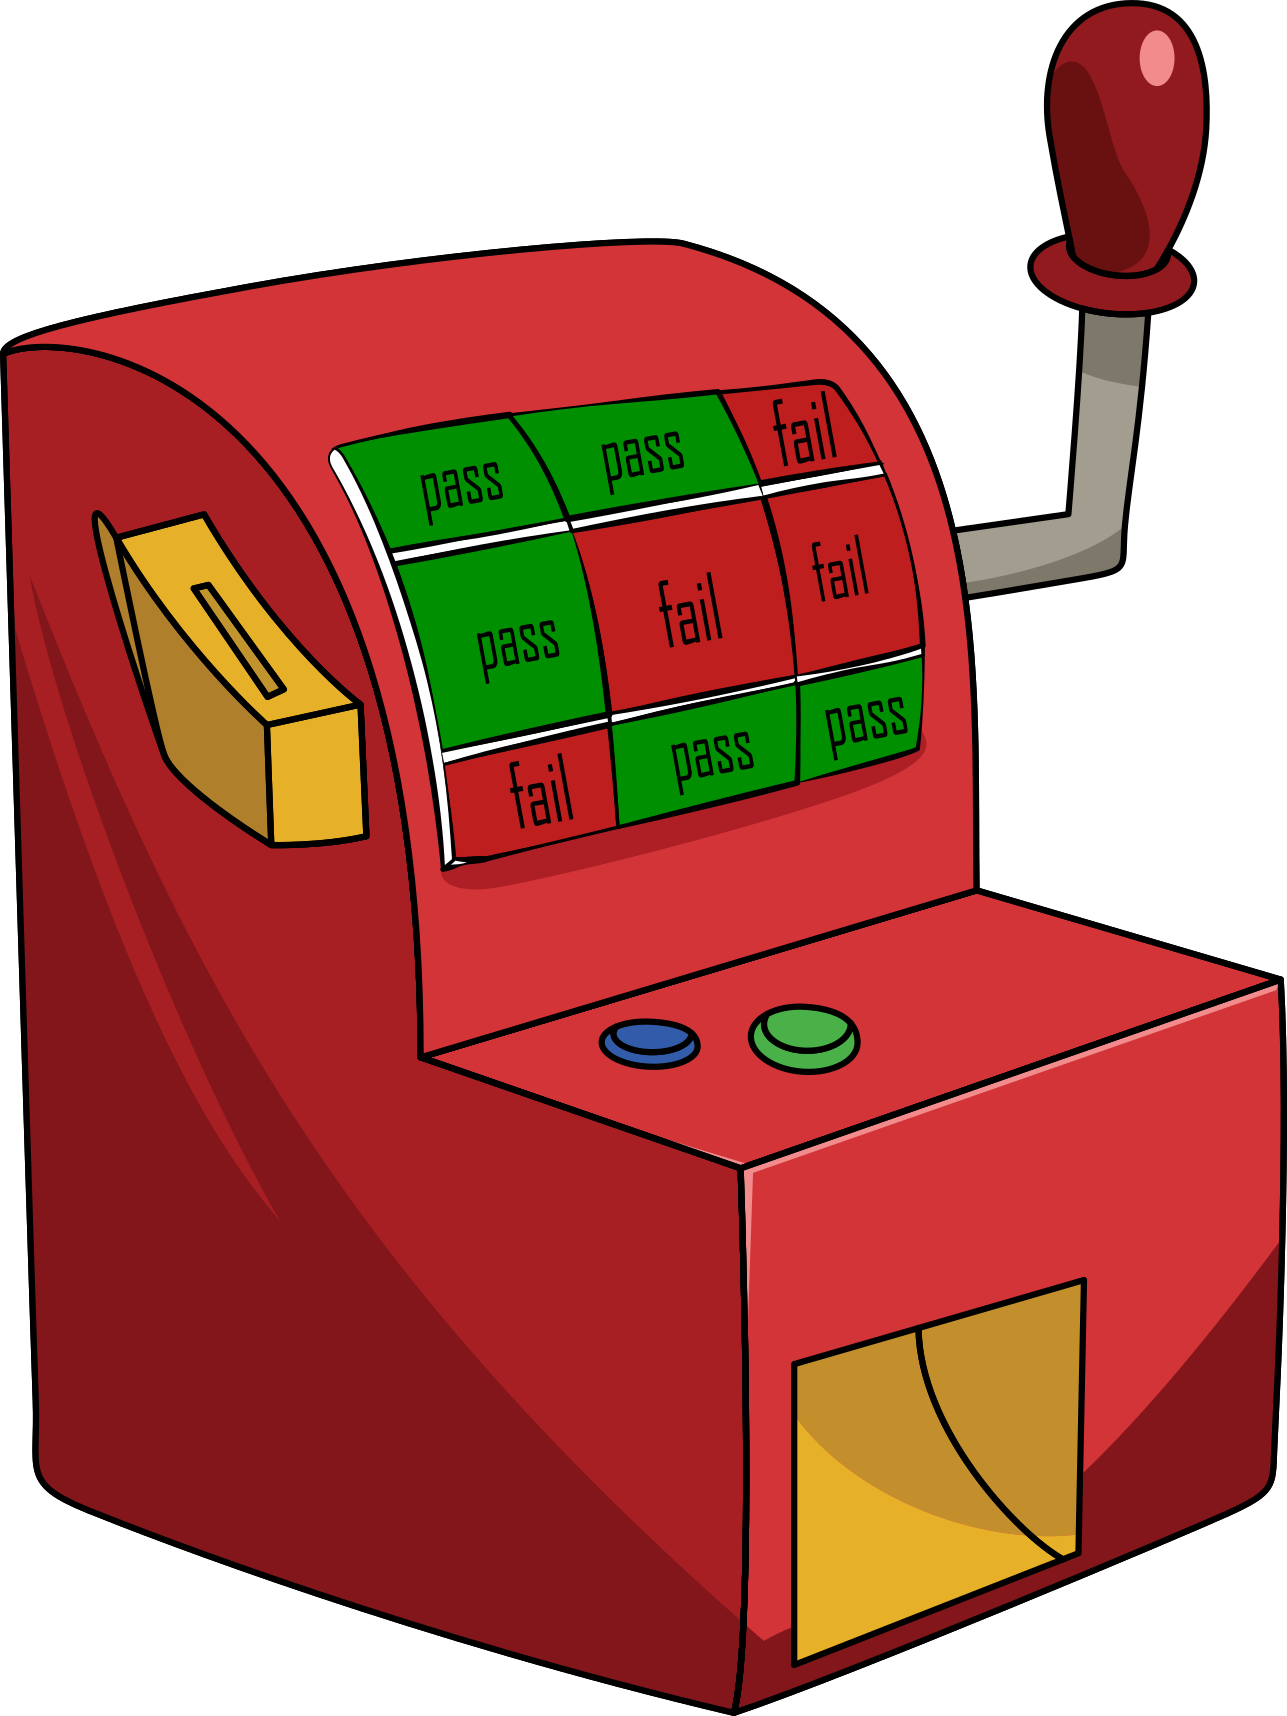 A Red Slot Machine With Buttons And A Red Handle